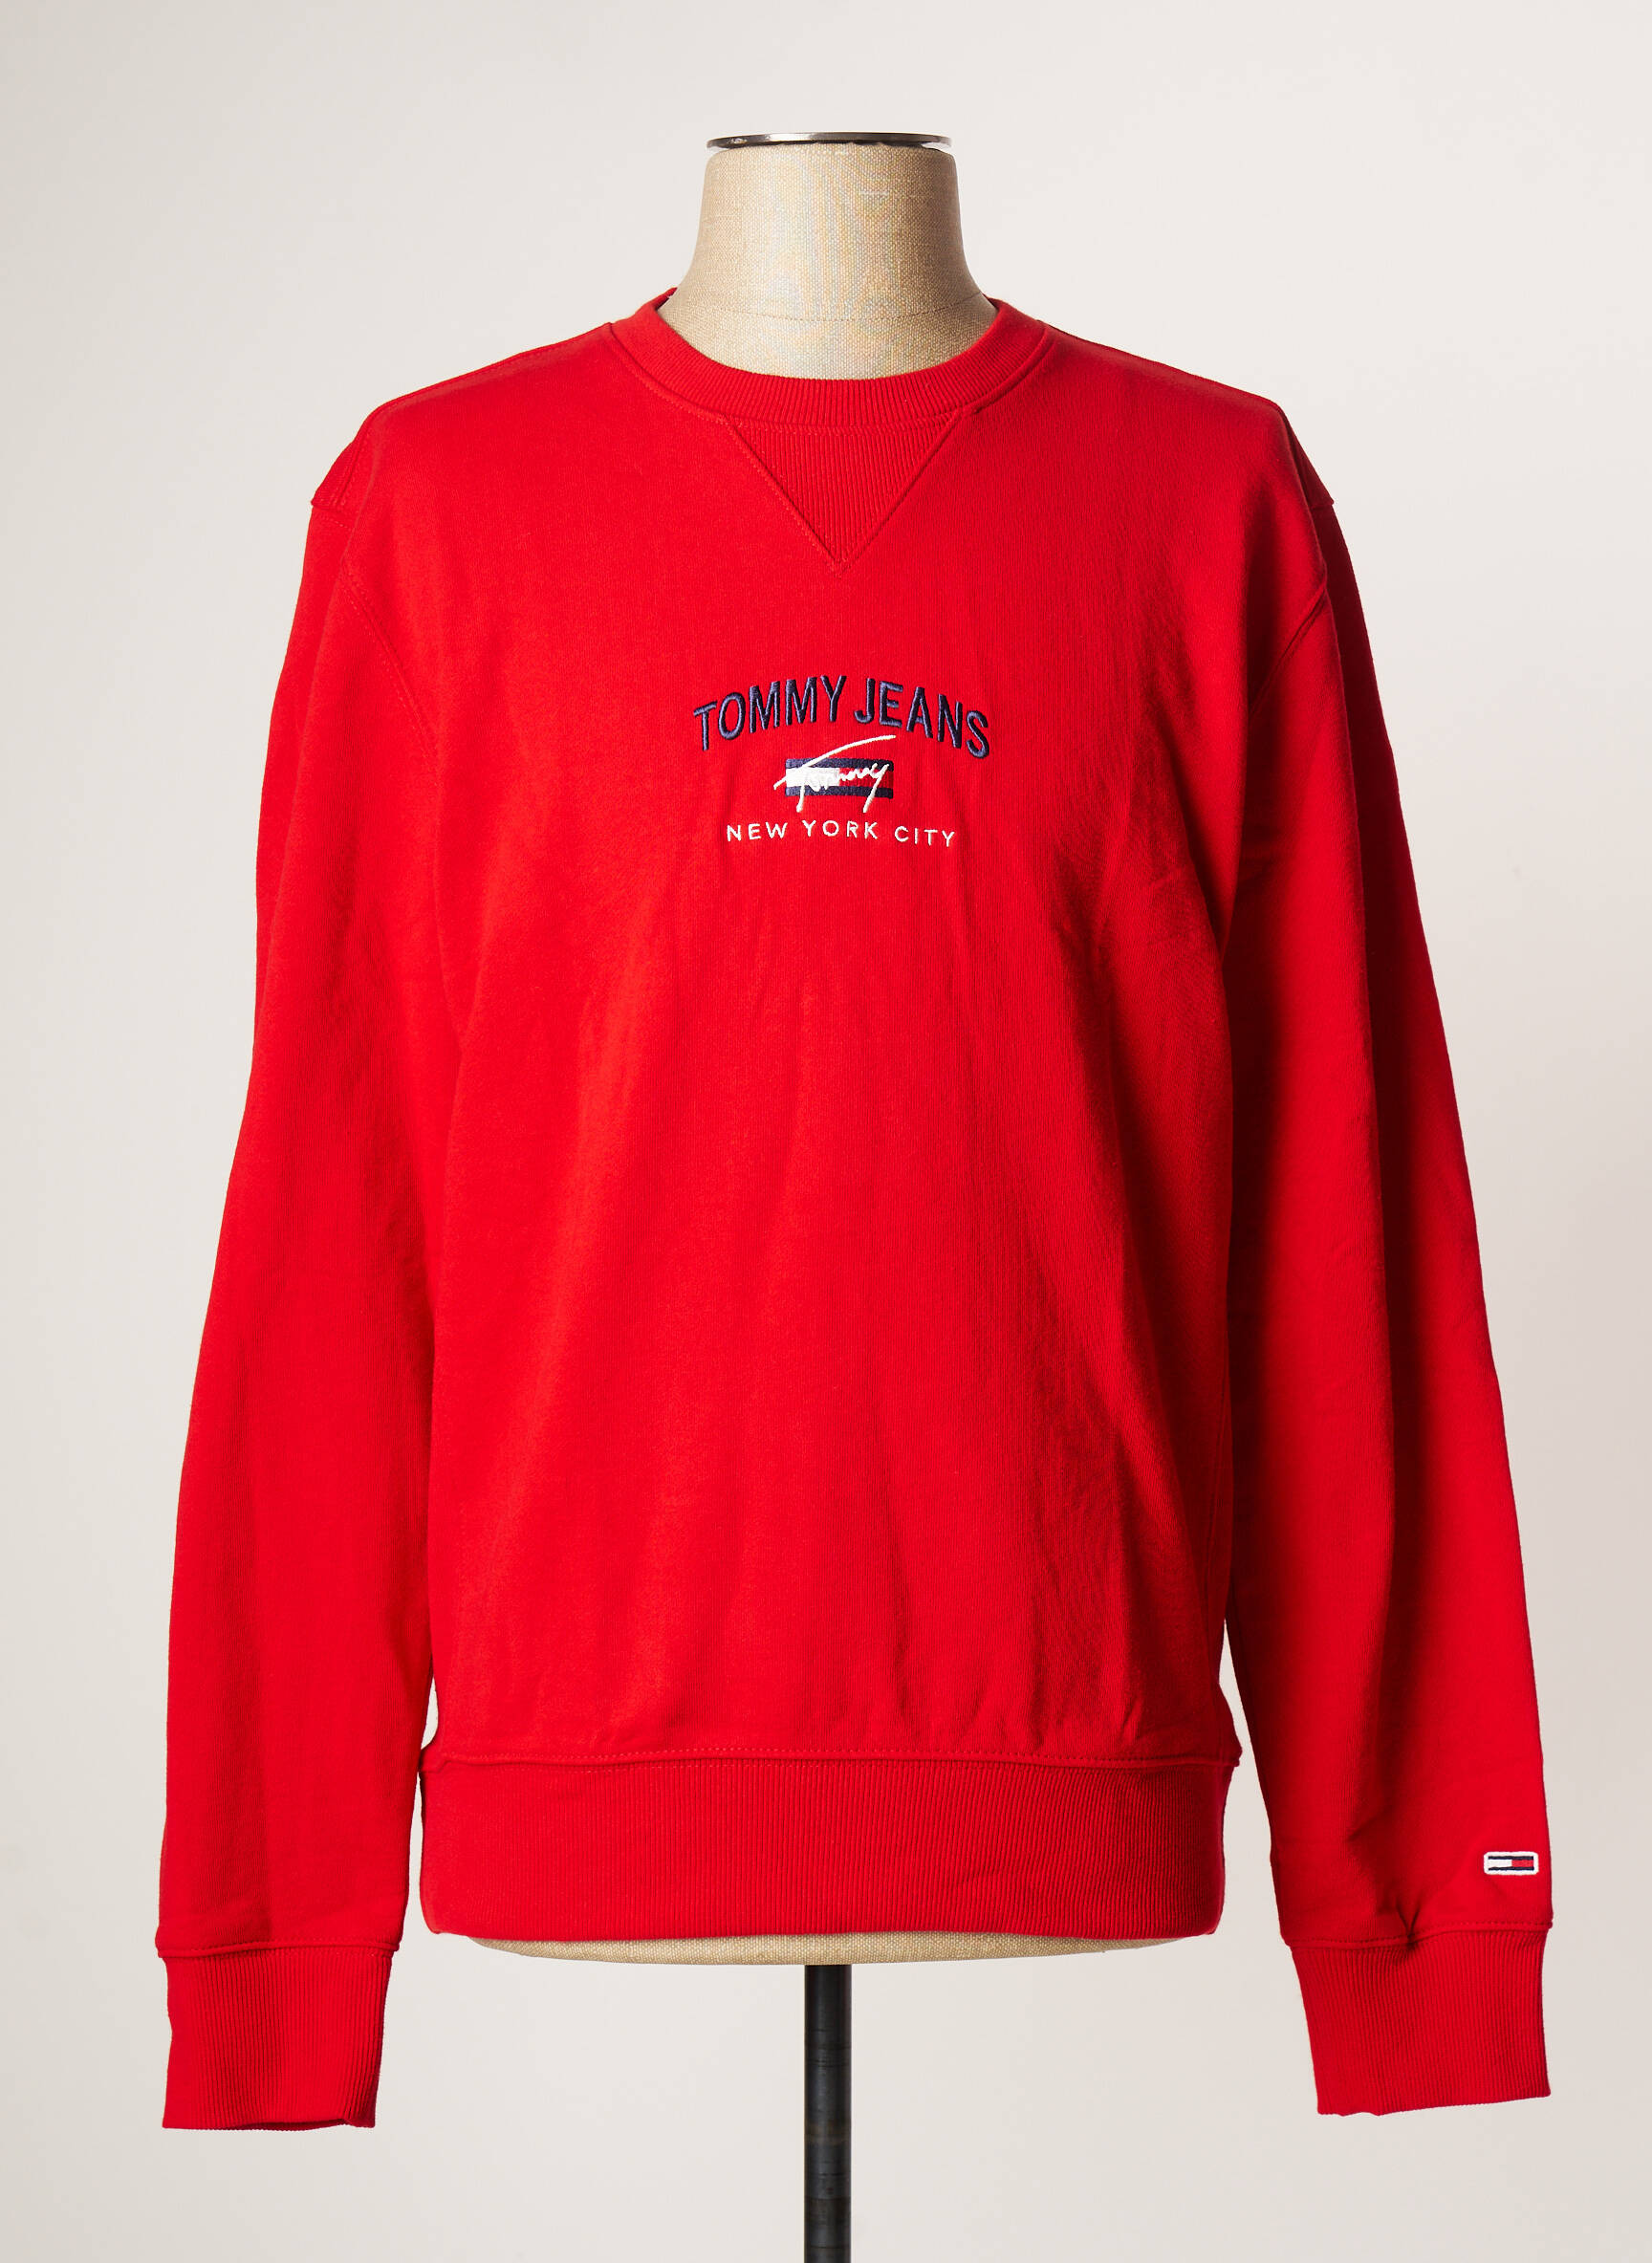 TOMMY HILFIGER, Sweat-shirt Rouge Homme